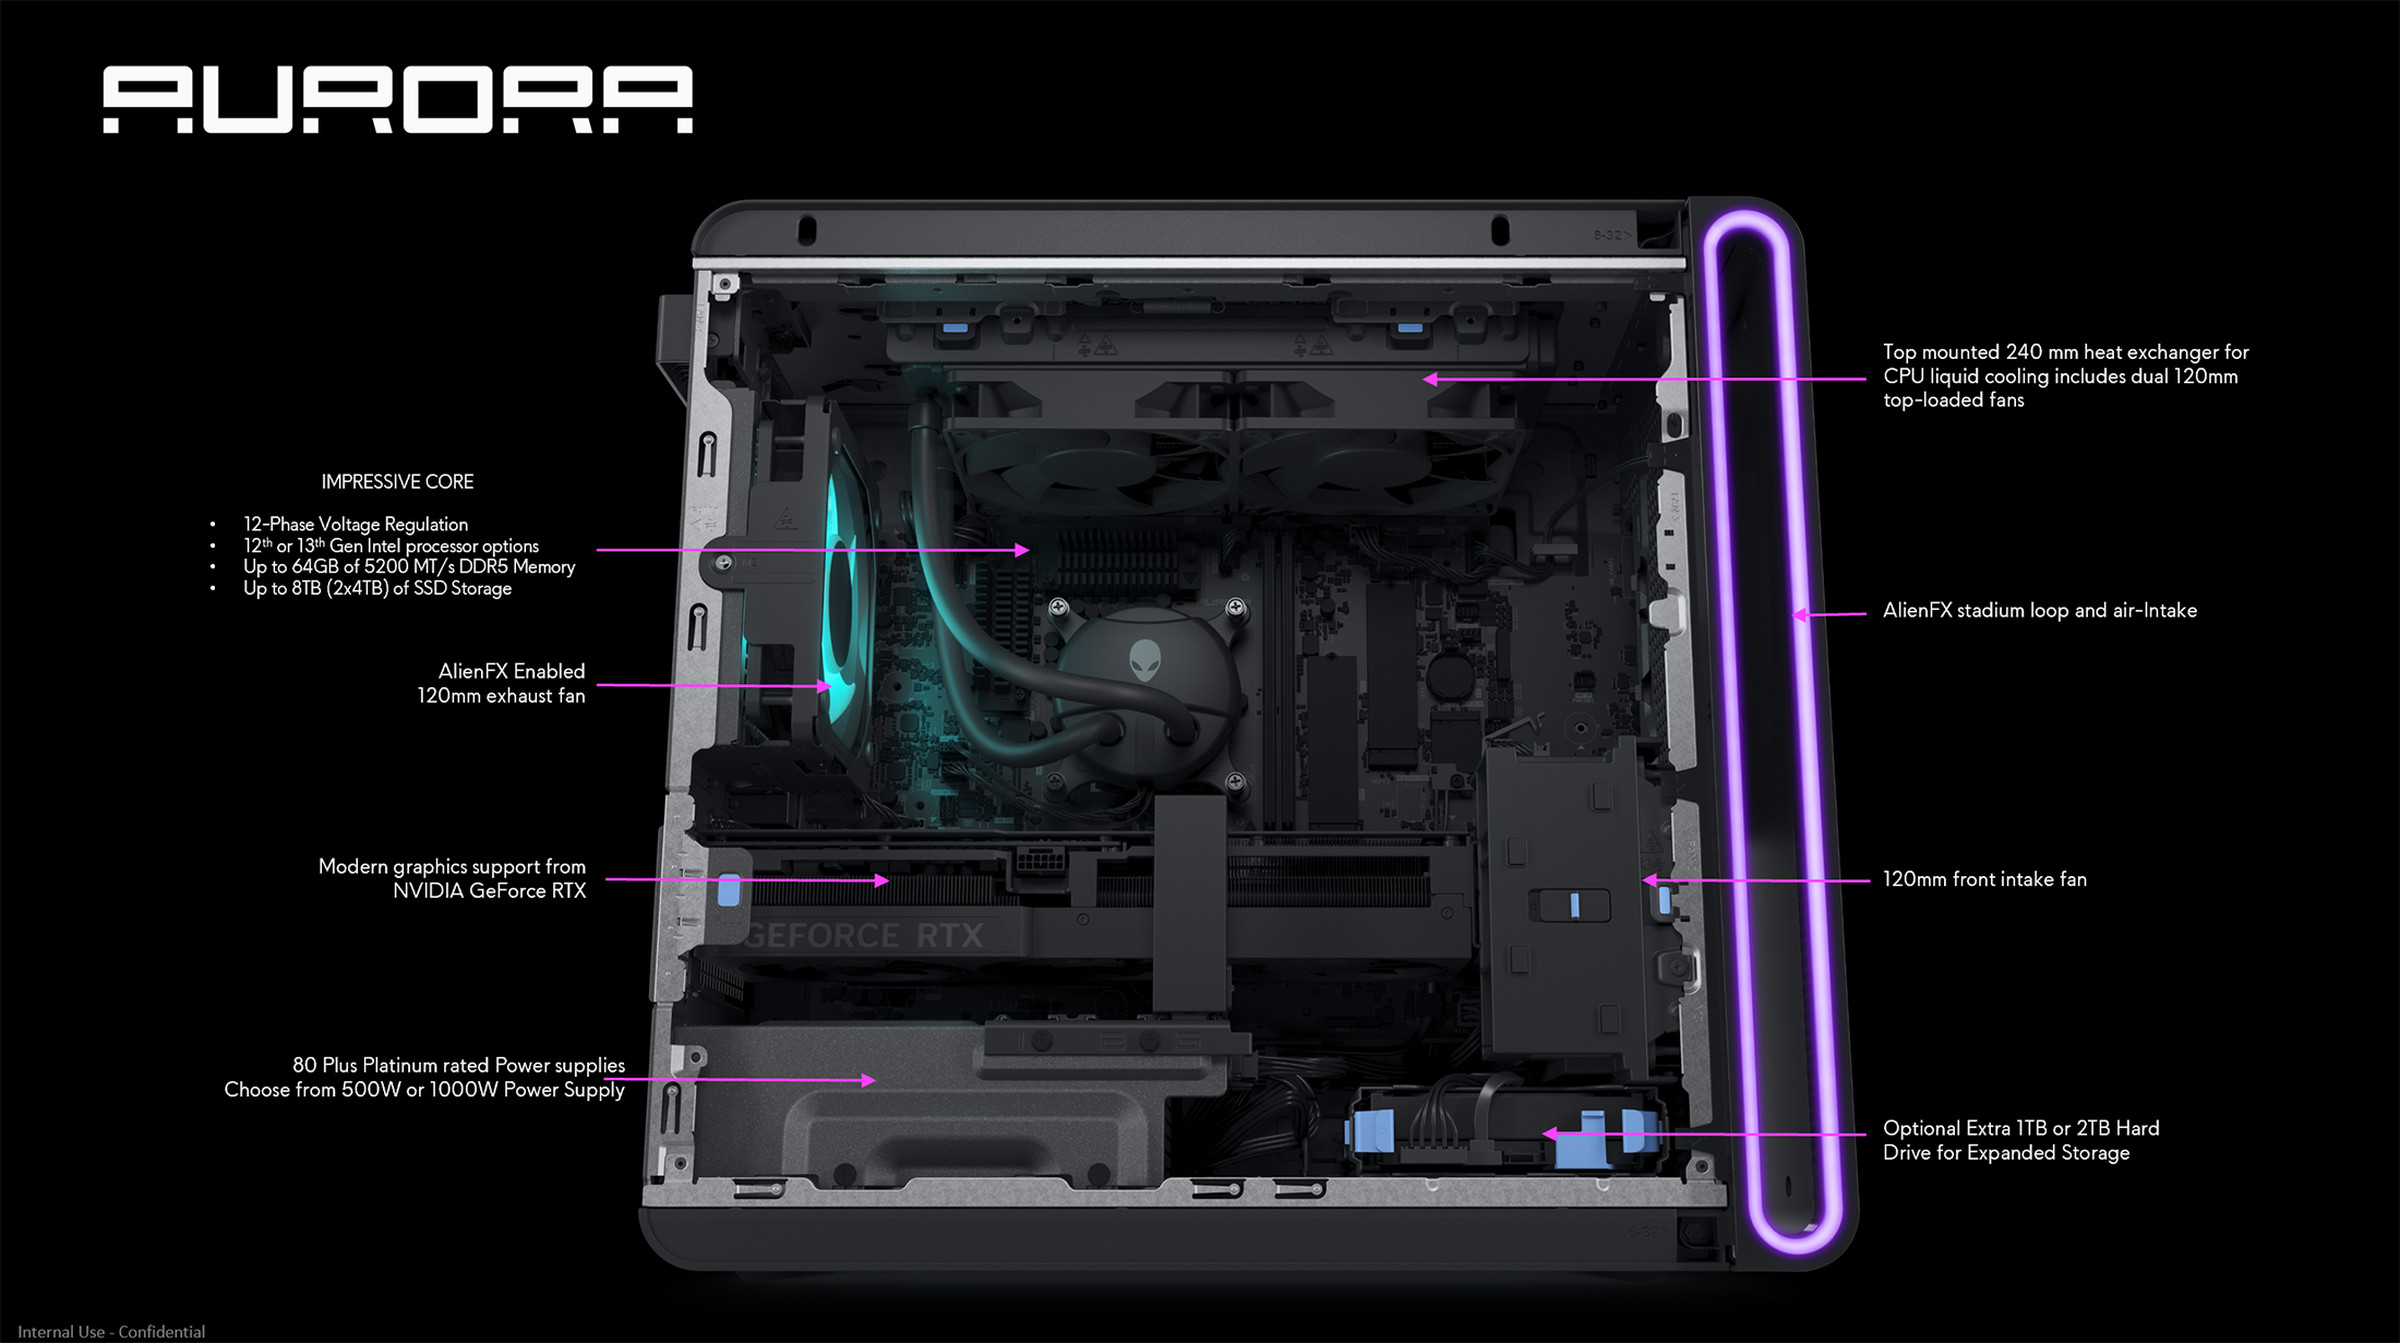 An infographic showing the Alienware Aurora’s specs.